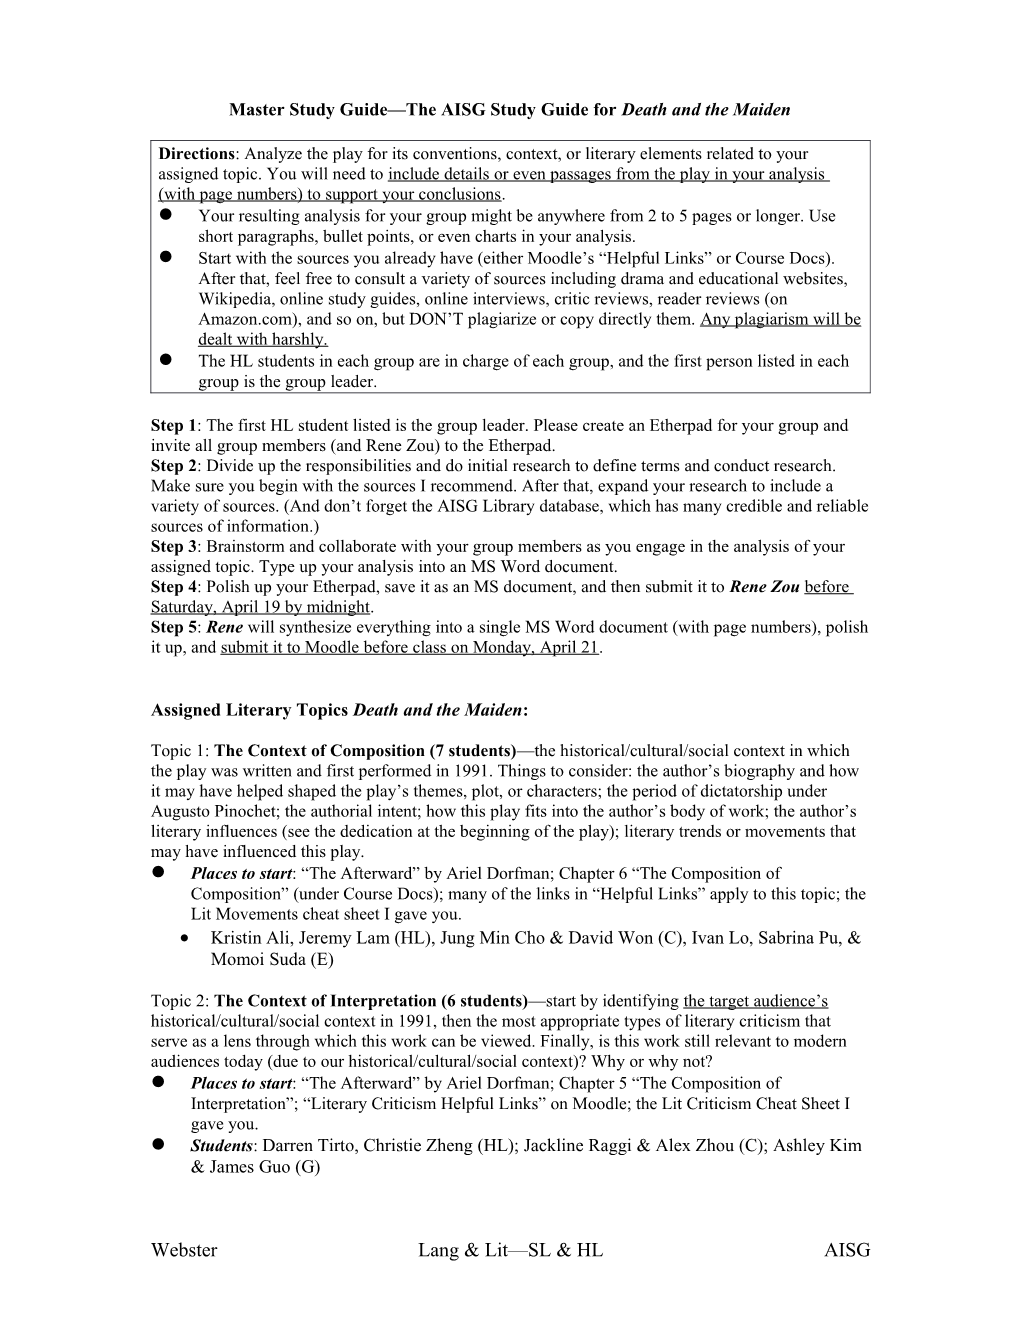 Master Study Guide the AISG Study Guide for Death and the Maiden